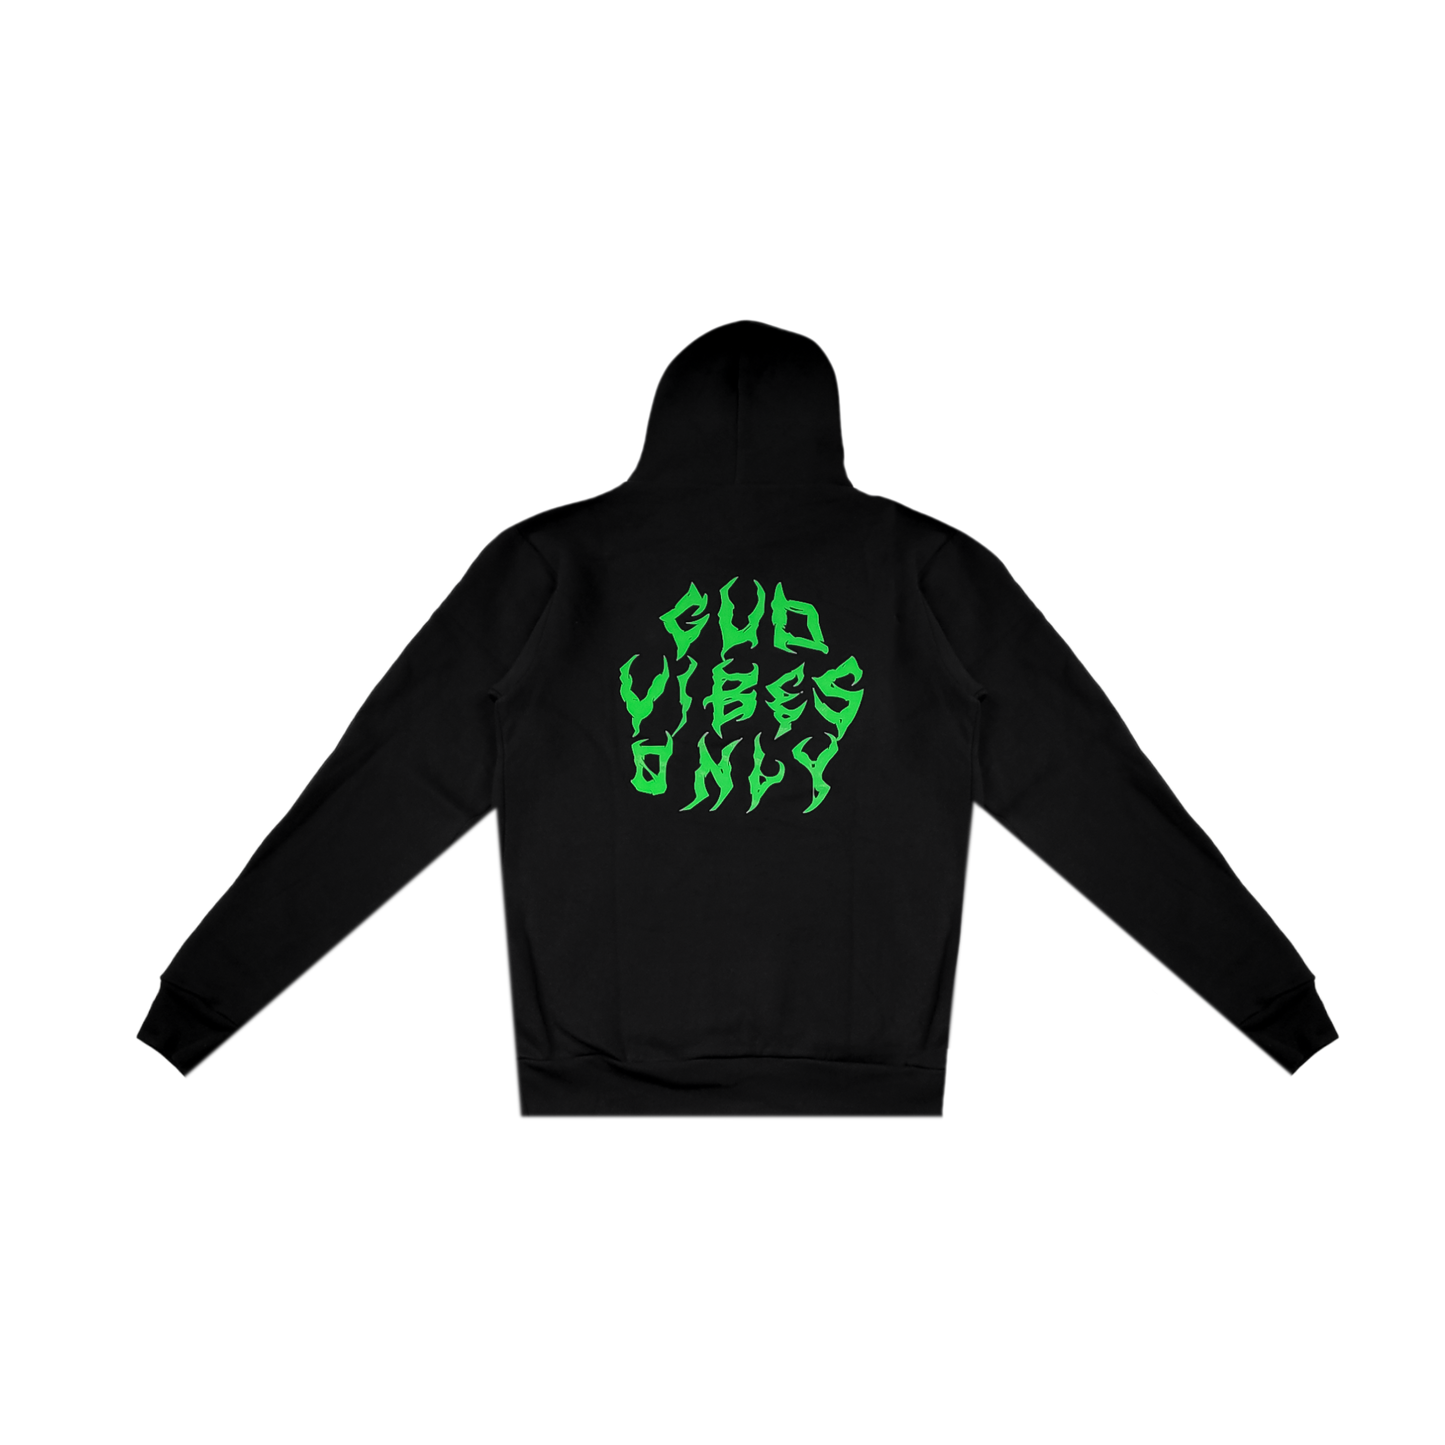 Good Vibrations - Good Vibes Only Hoodie